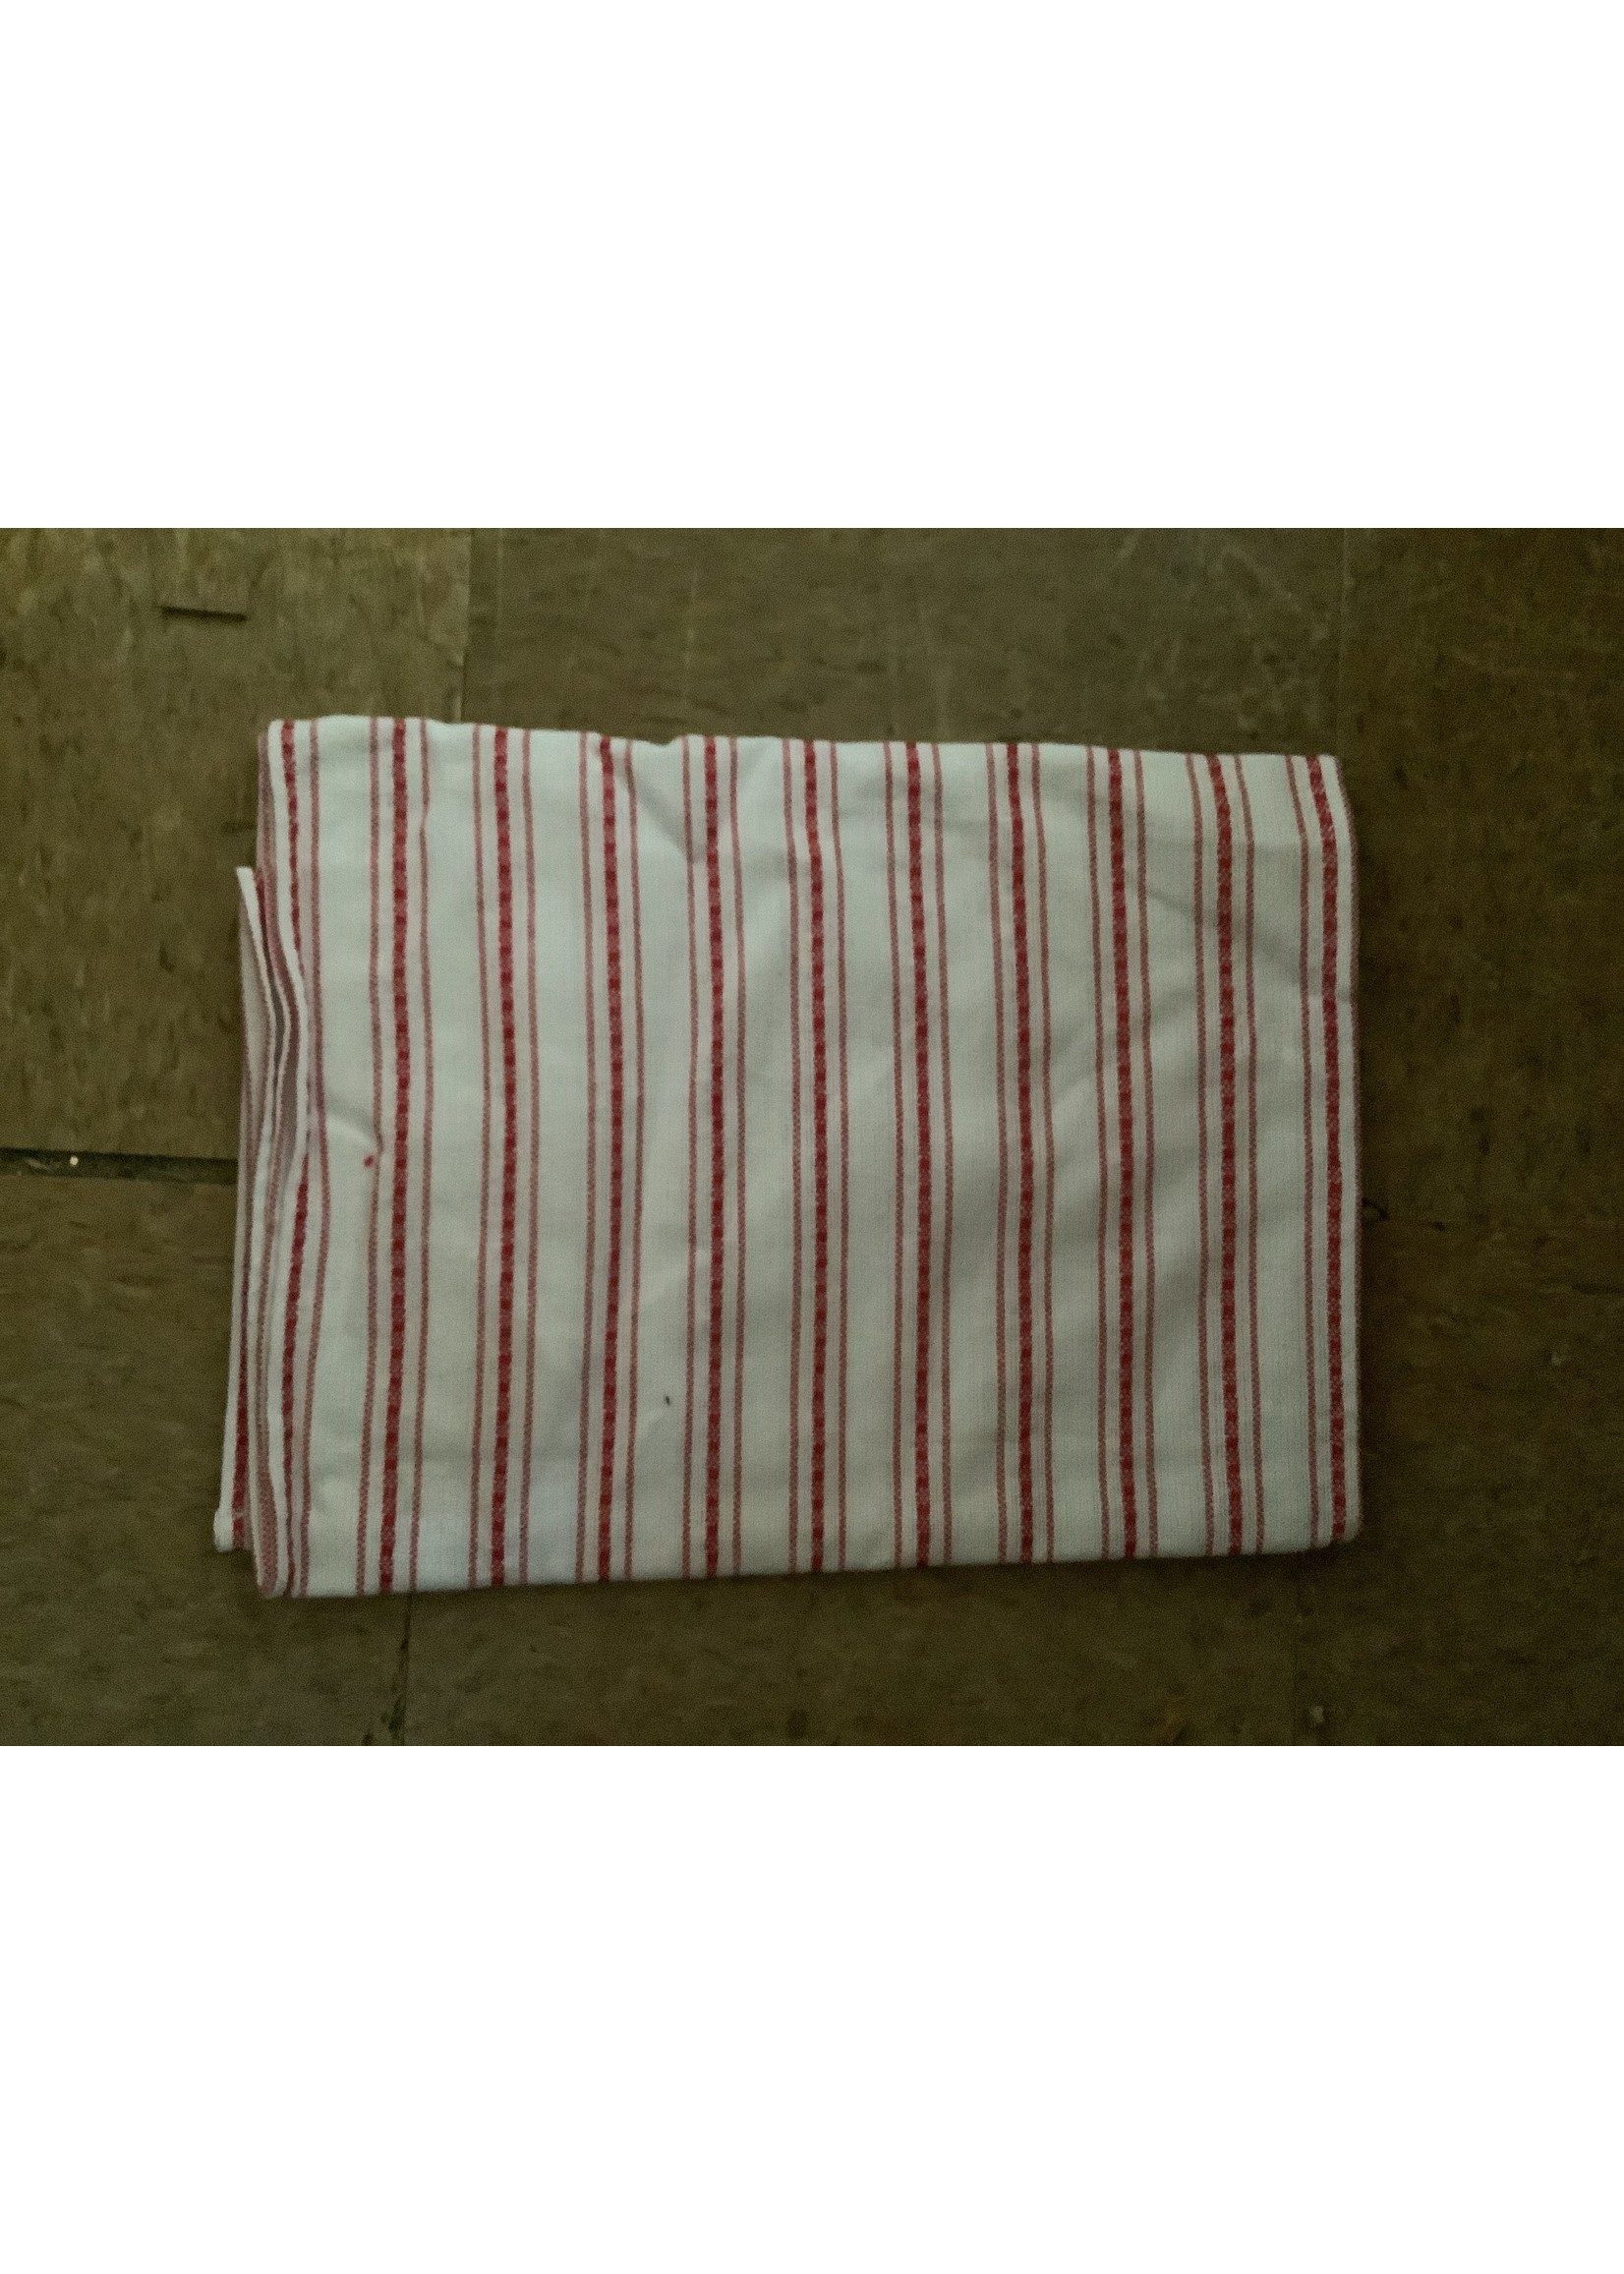 Red and white striped table runner 14x64 in